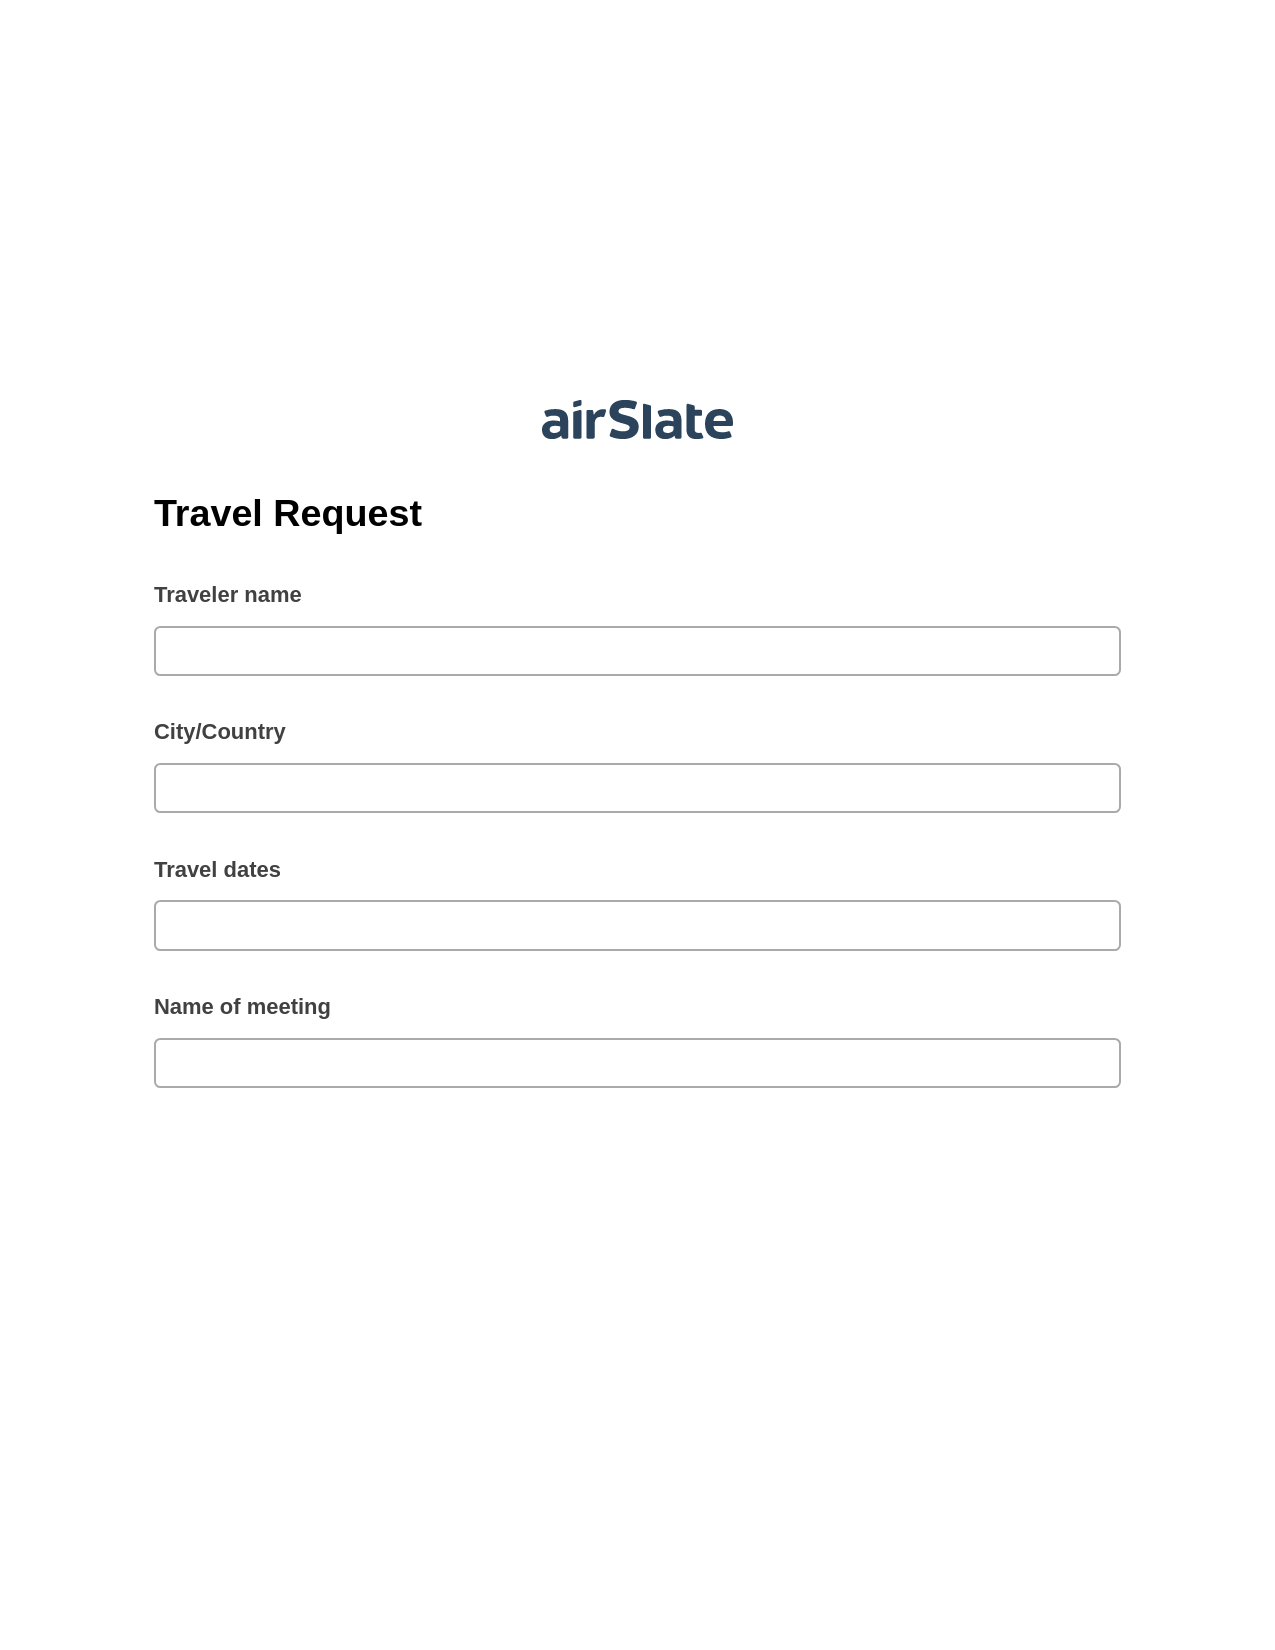 Travel Request Pre-fill from Salesforce Record Bot, Create slate from another Flow Bot, Export to Smartsheet